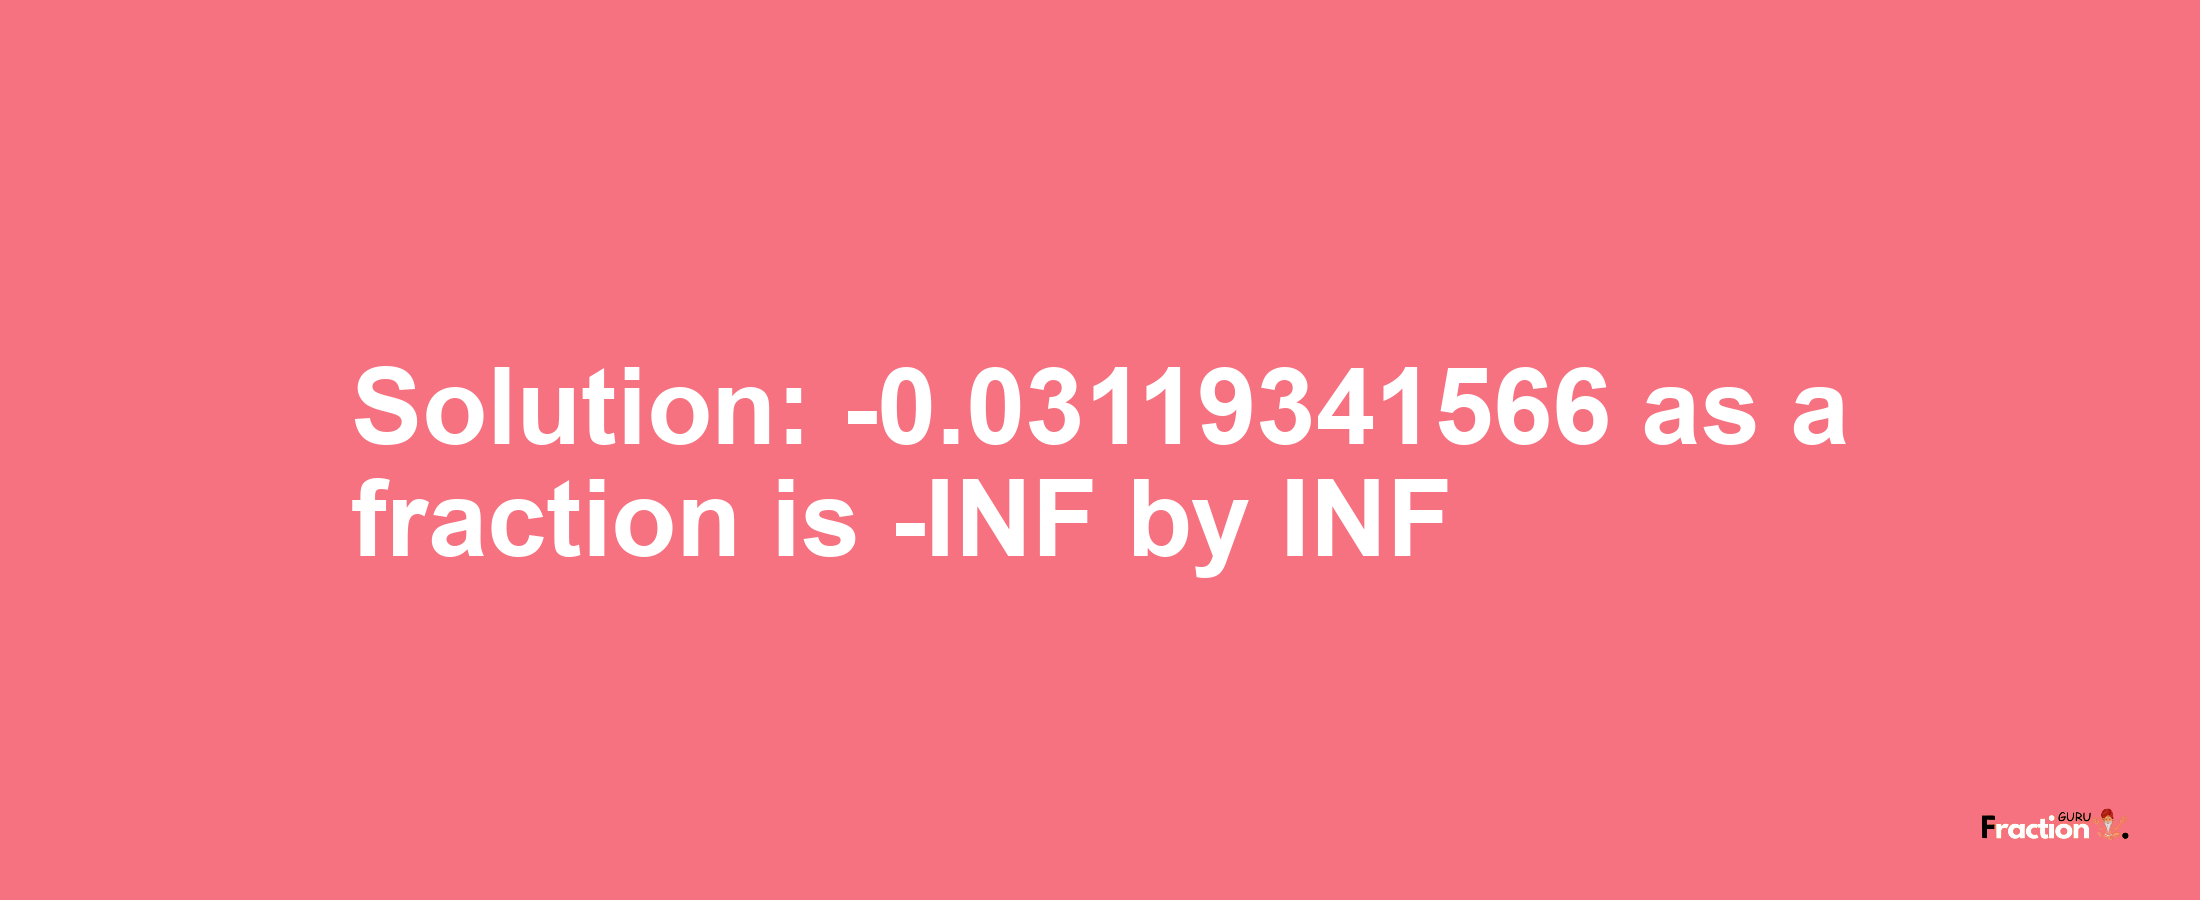 Solution:-0.03119341566 as a fraction is -INF/INF